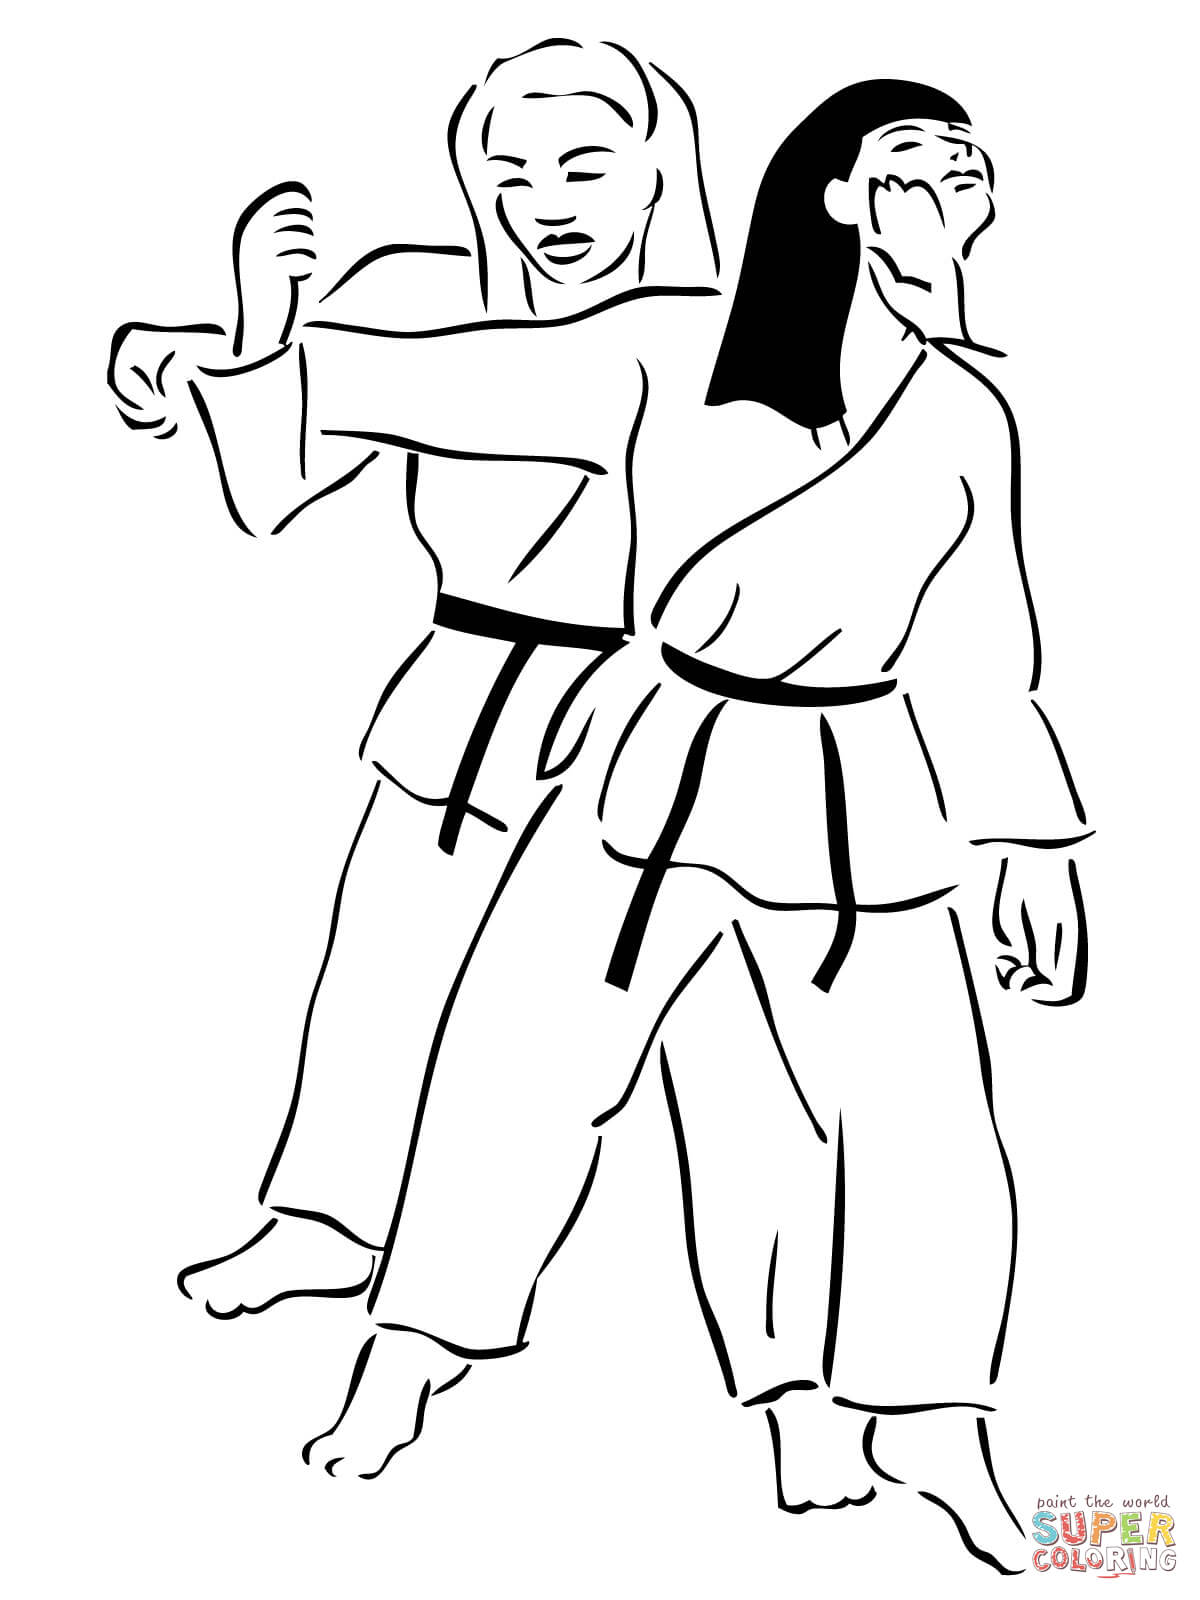 Woman Judo Fight coloring page | Free Printable Coloring Pages